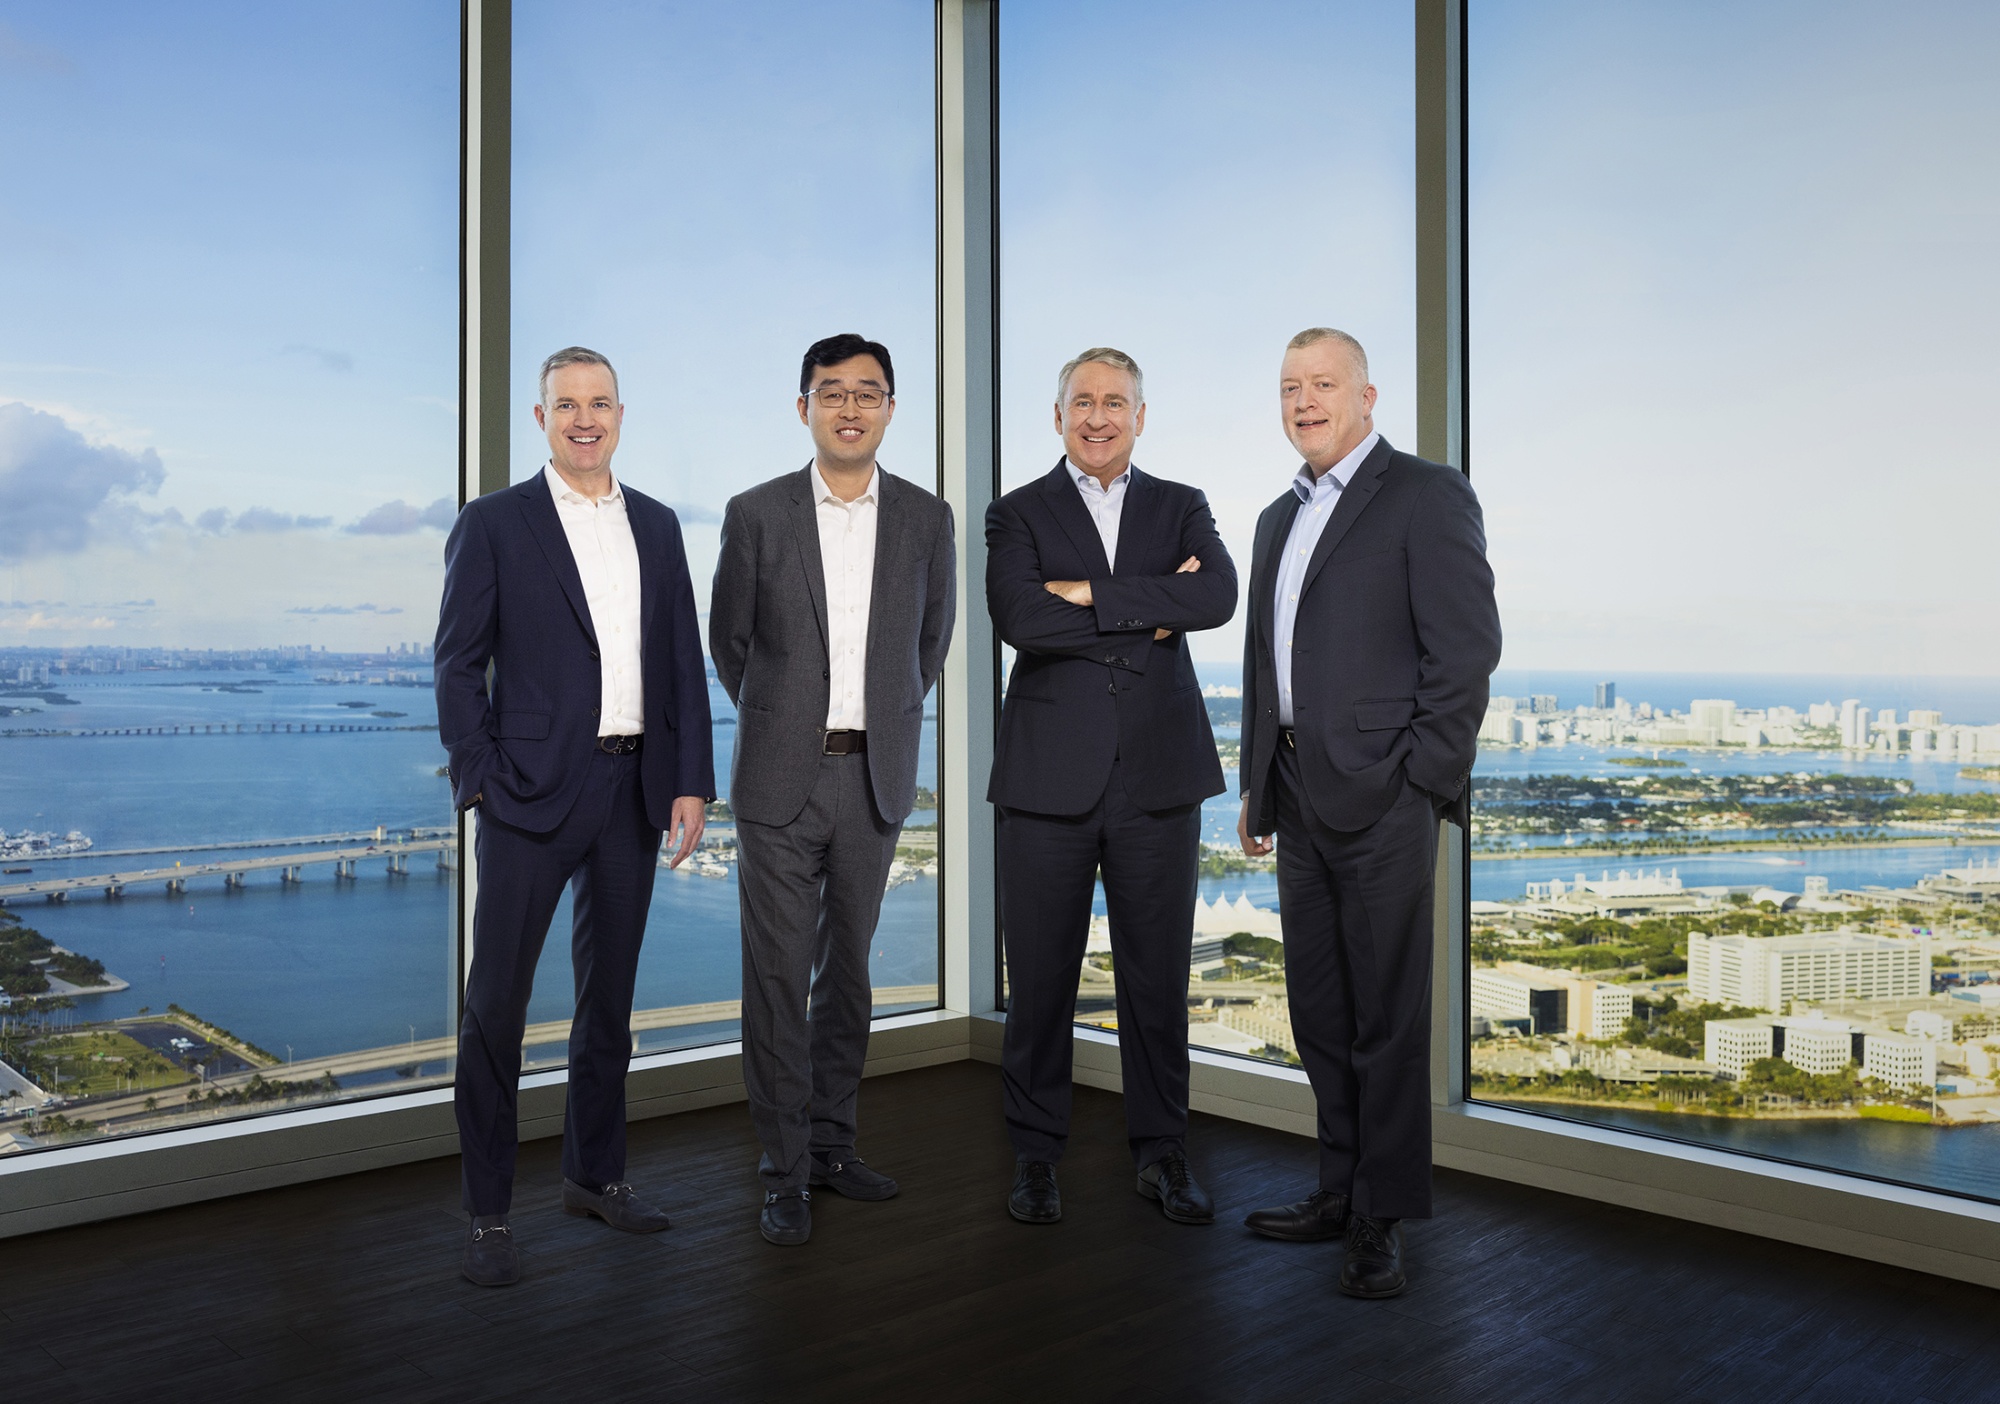 Citadel CEO says Miami could become the new financial capital of